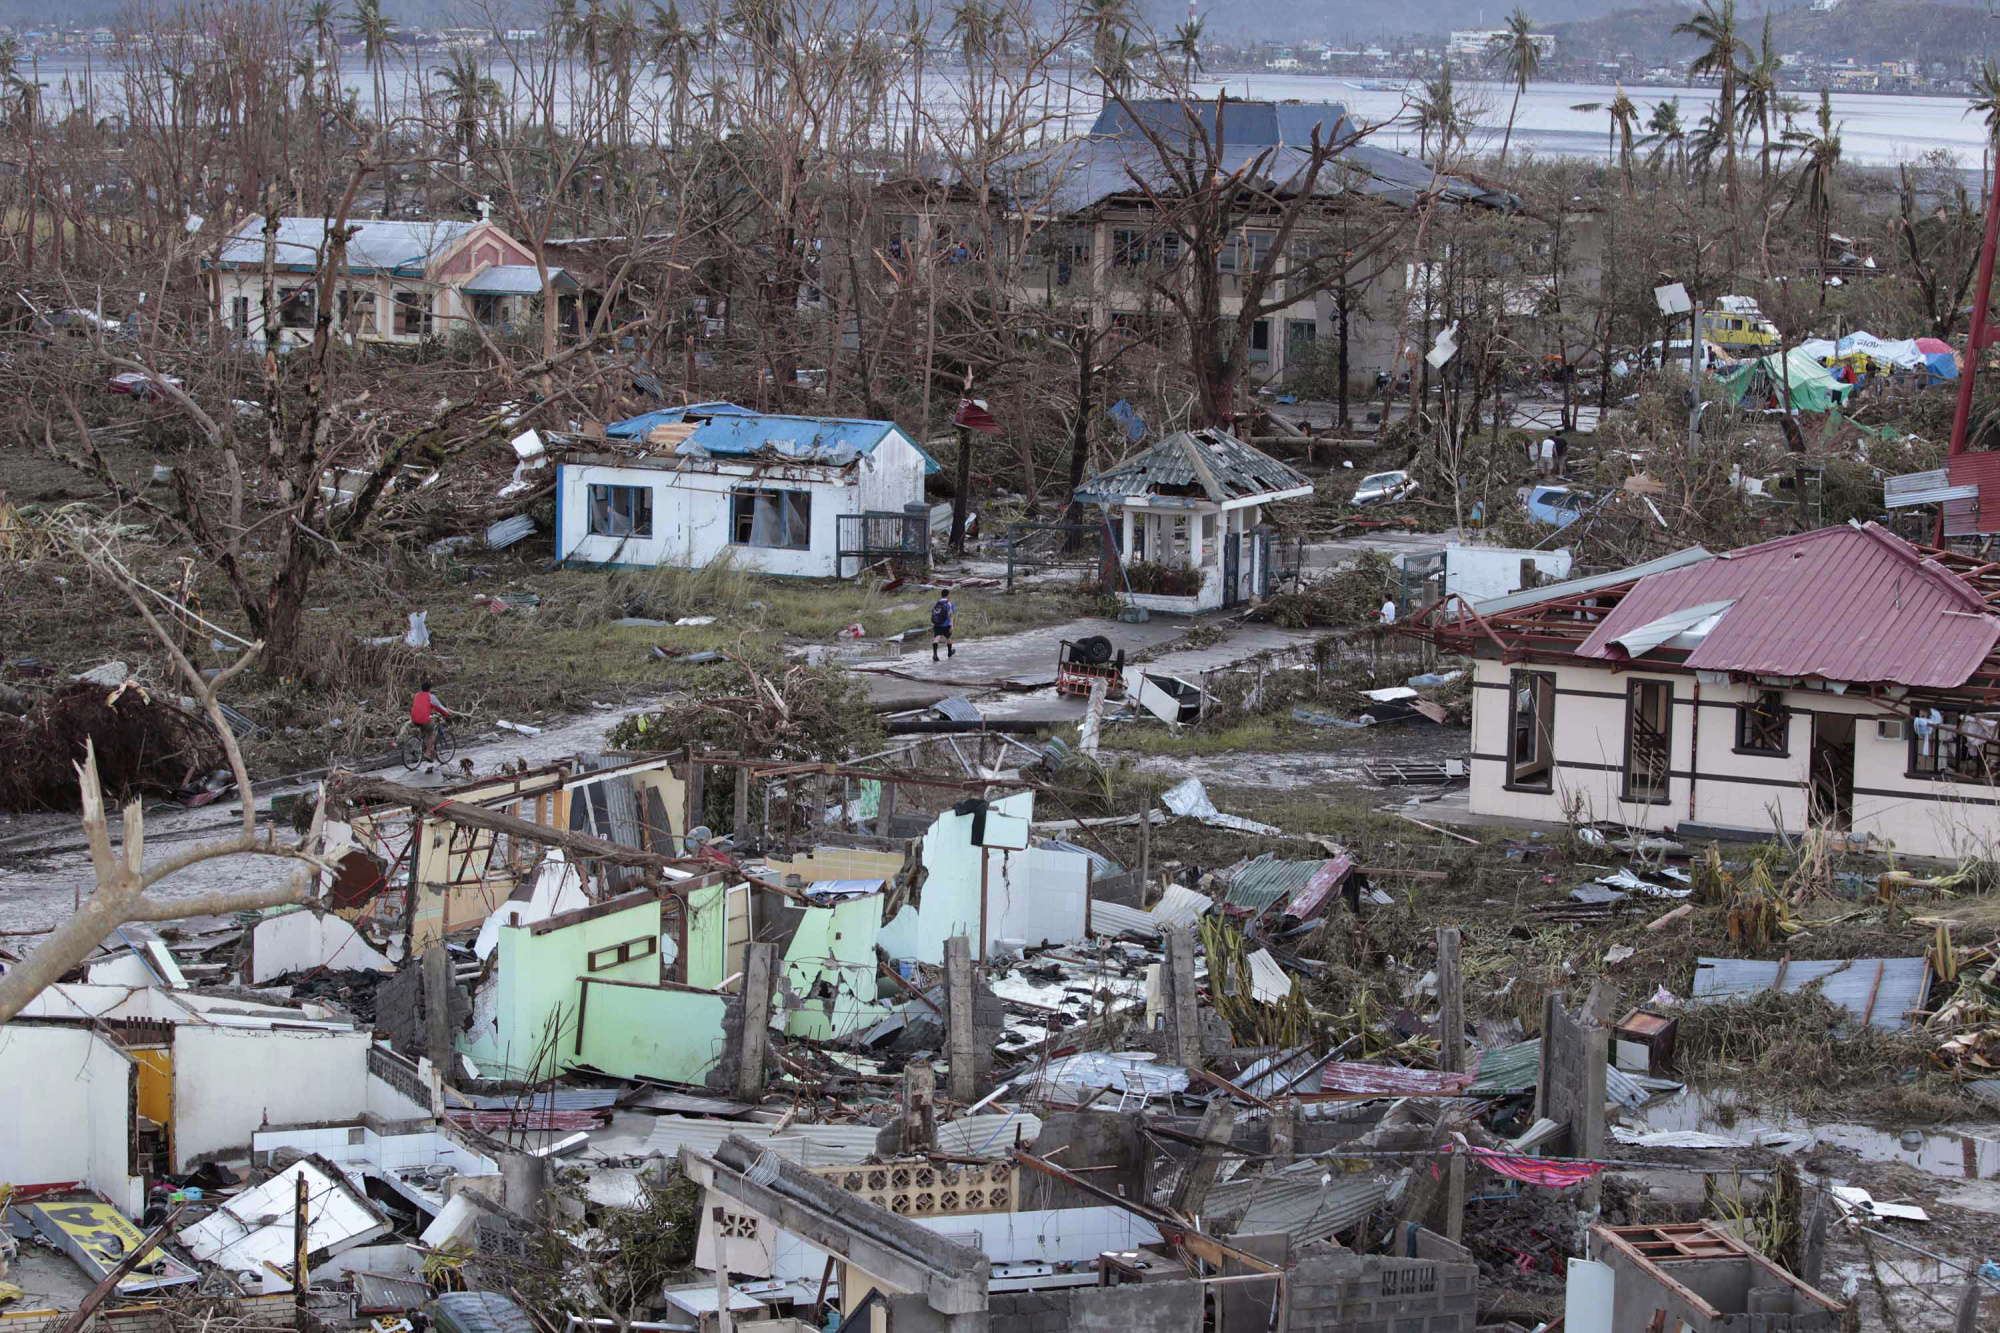 A resident walks by remains of houses on Nov. 9, 2013, after Supertyphoon Haiyan slammed into Tacloban, in the Philippines' Leyte province